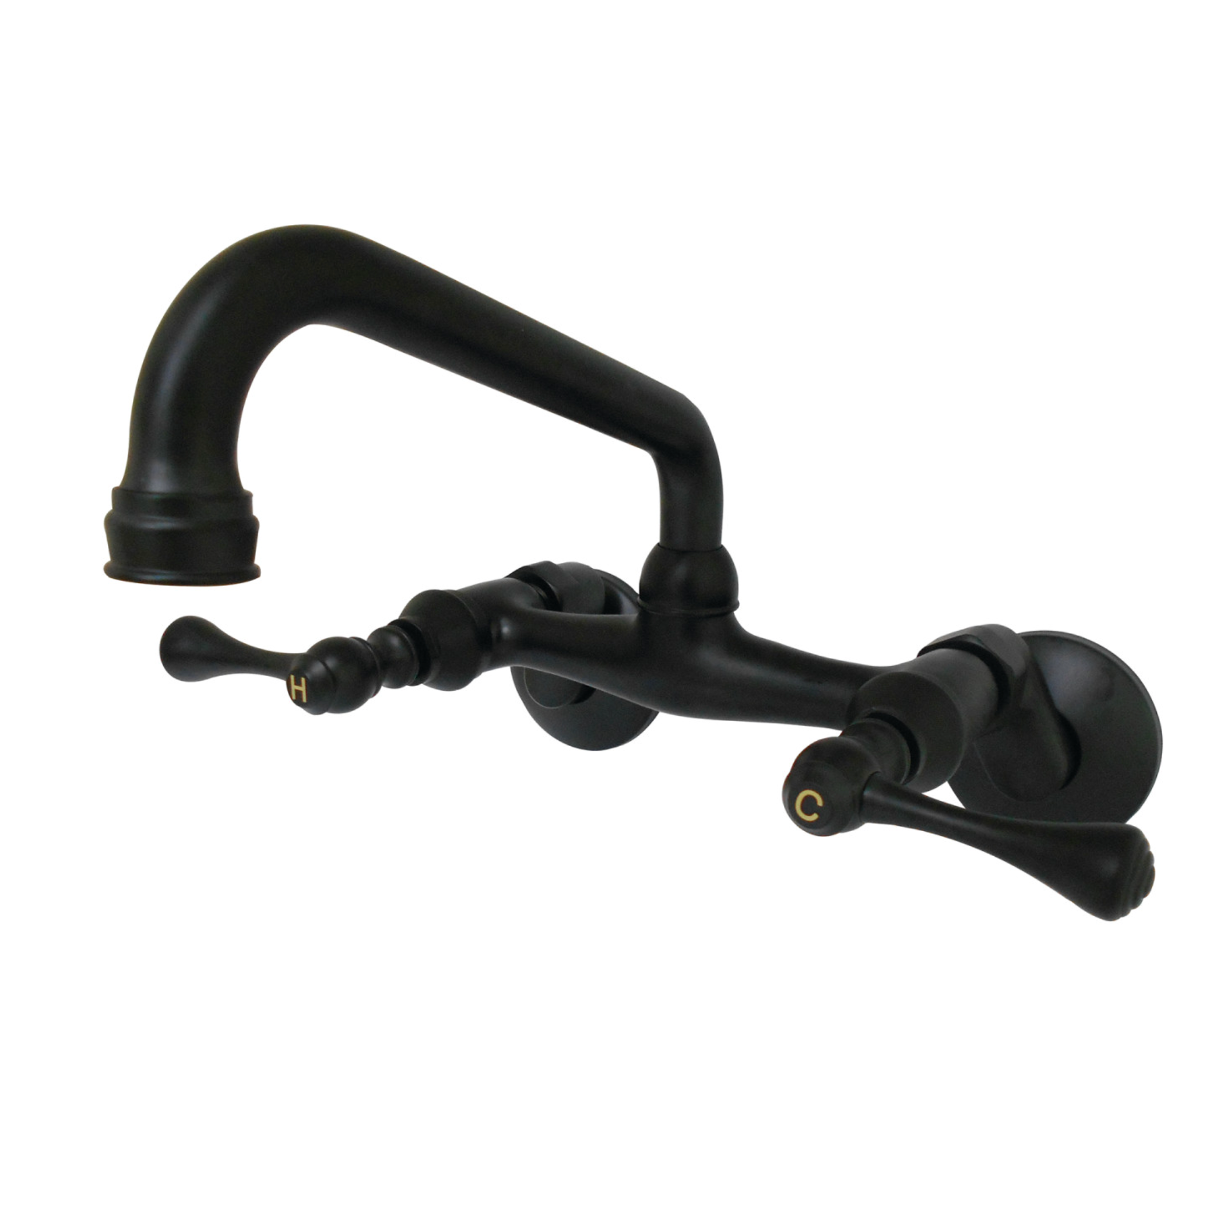 Two Handle Wall Mount Kitchen Faucet